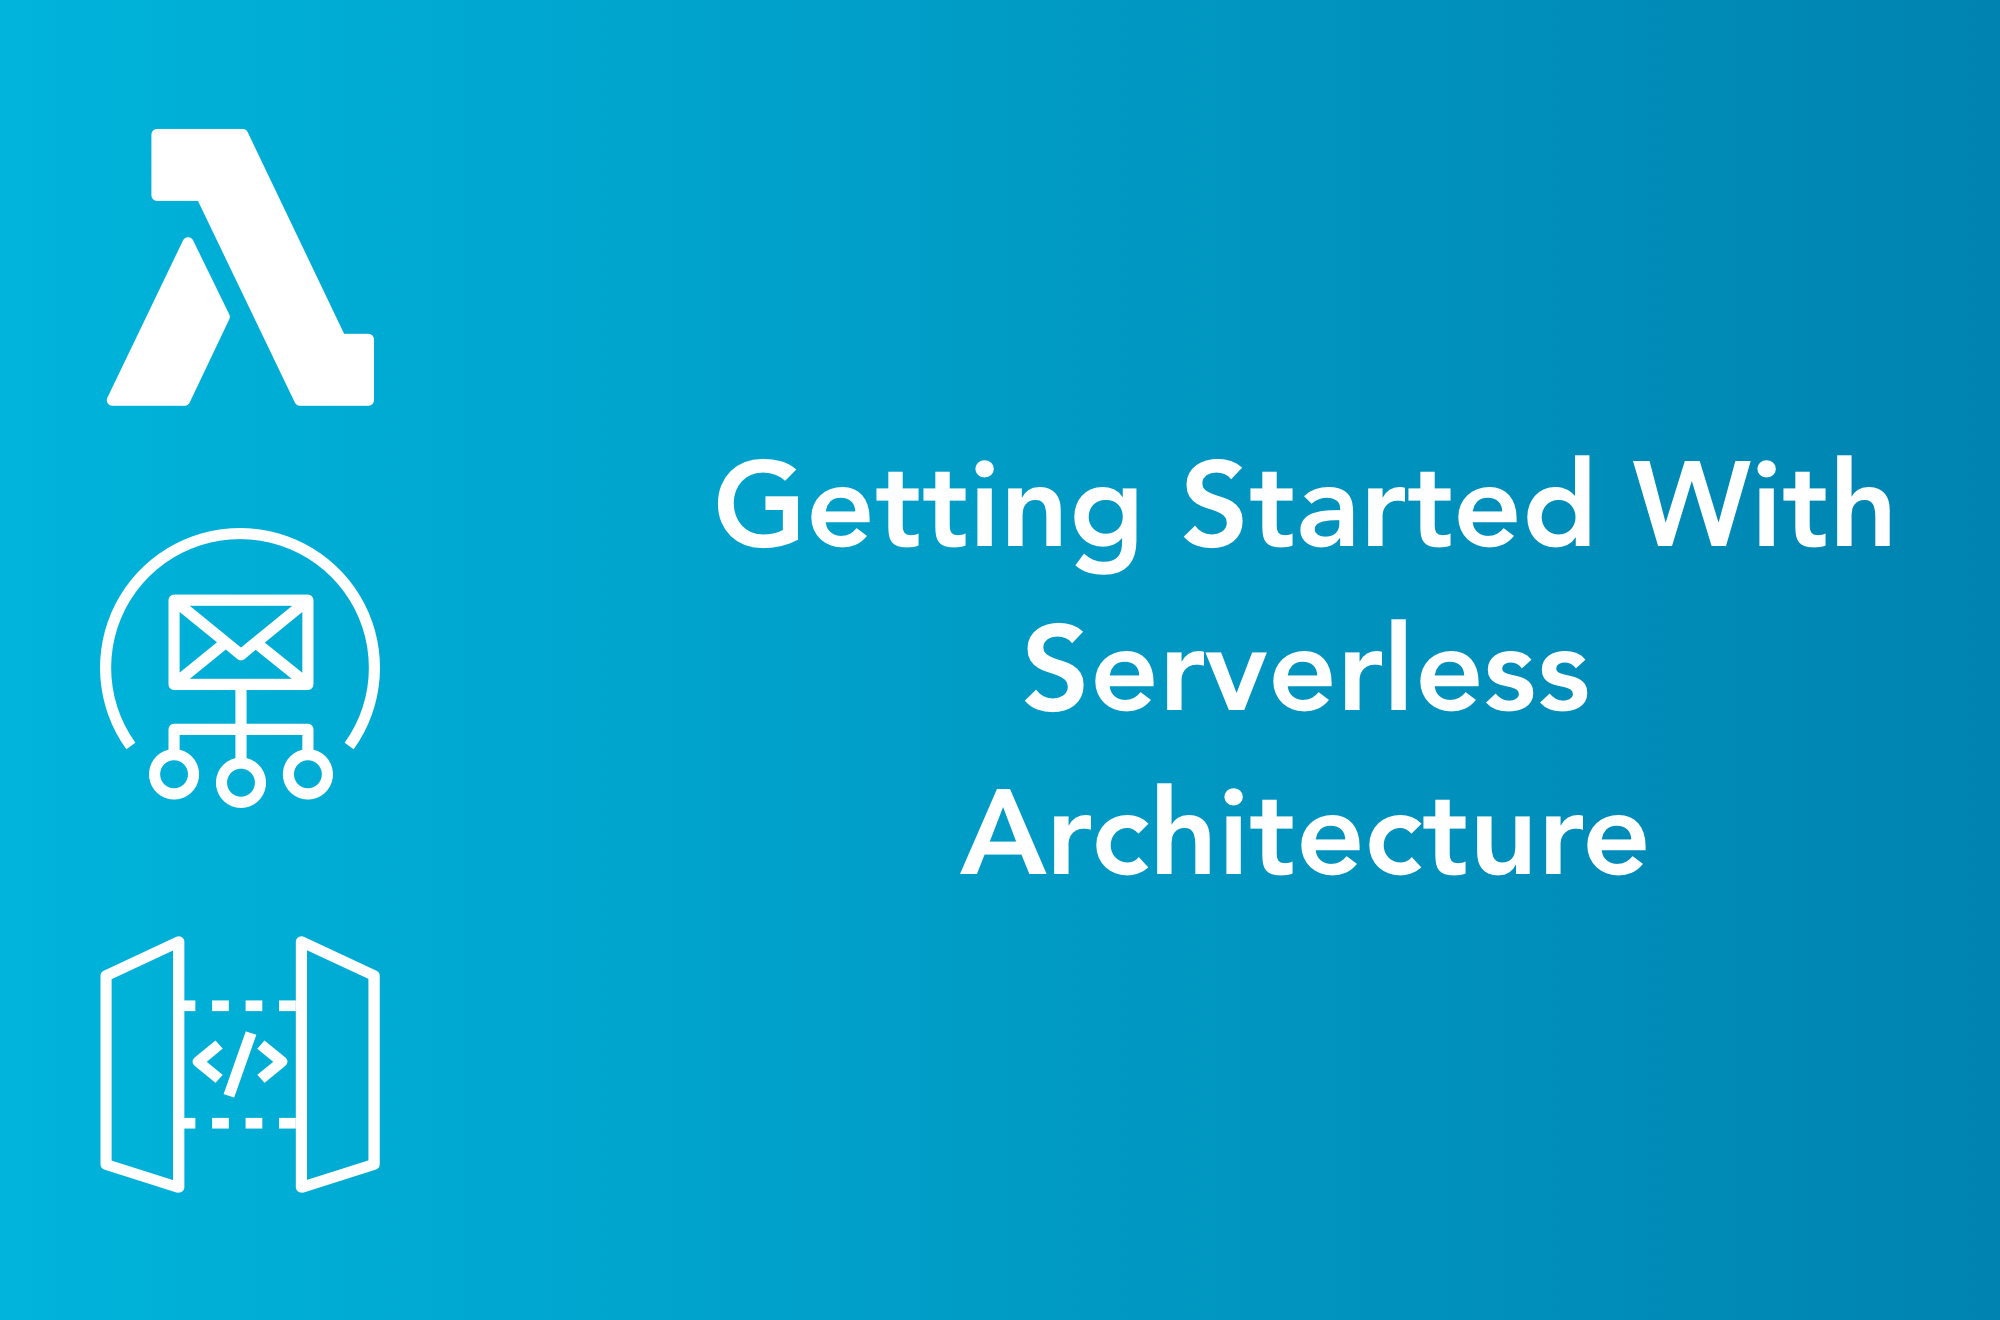 How to Get Started With Serverless Architecture